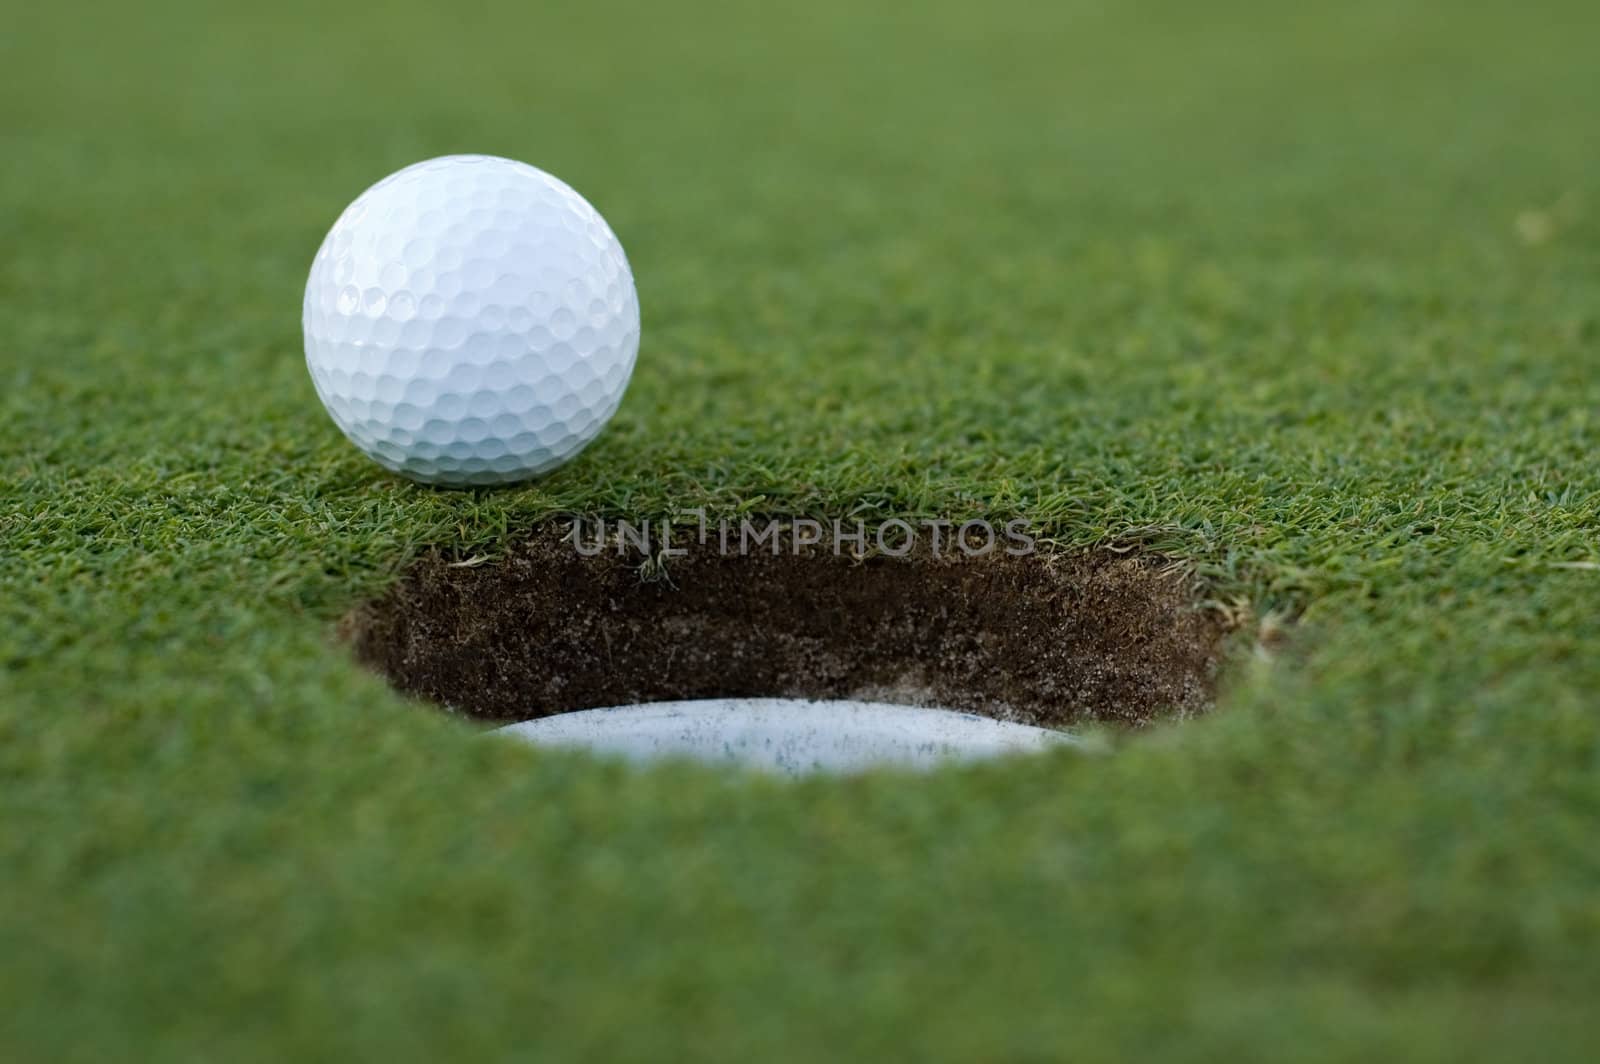 Golf ball on putting green next to hole